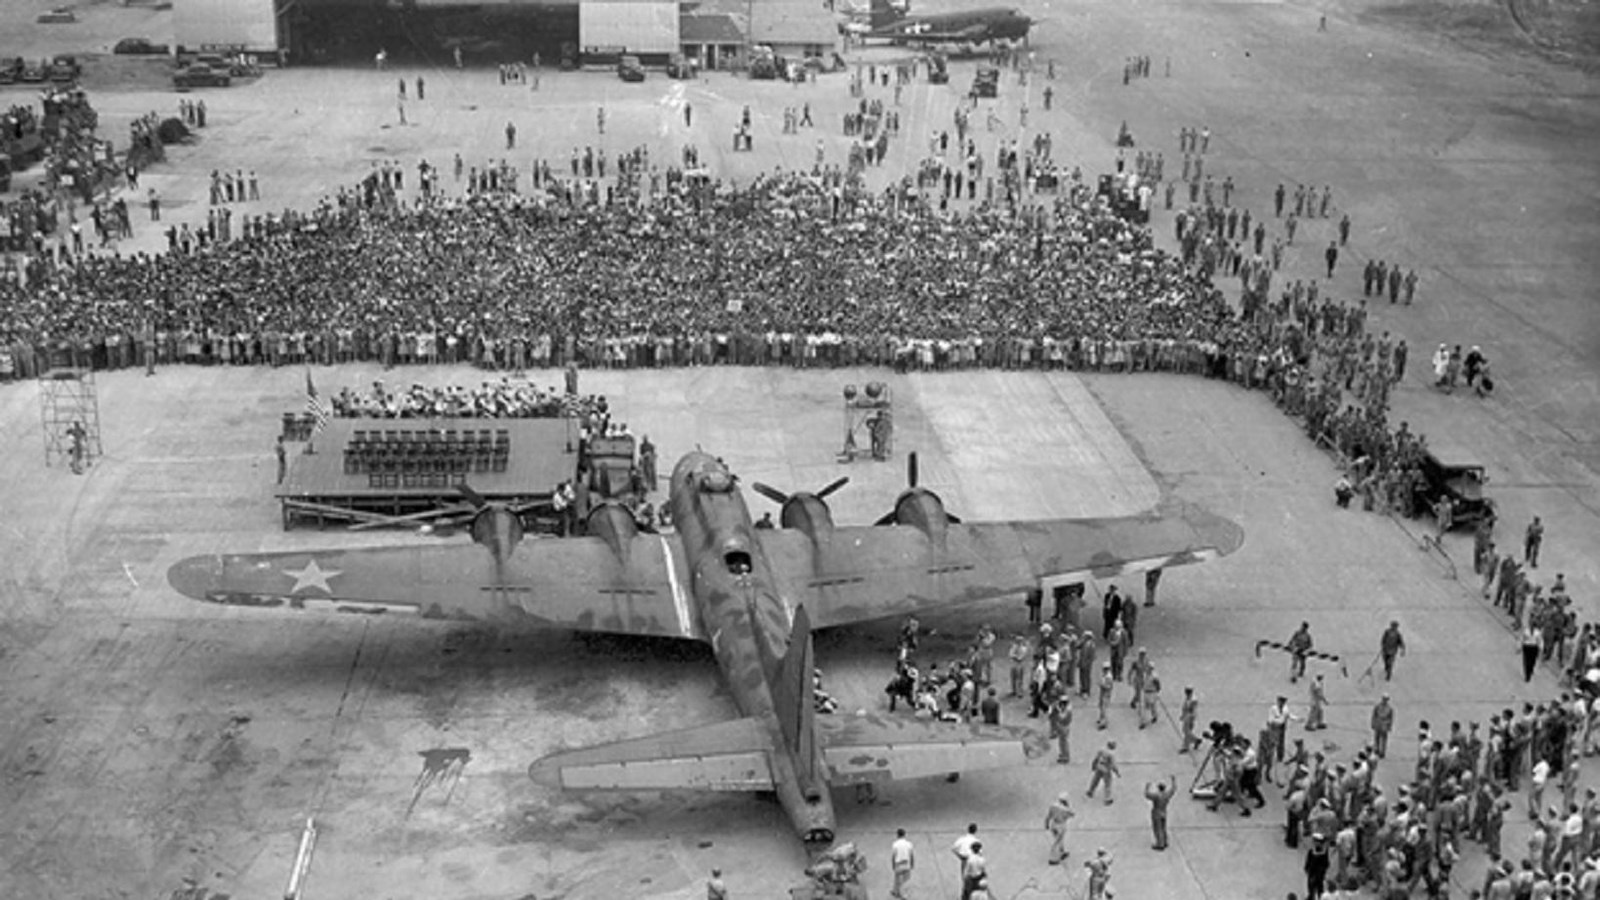 large plane with crowd of people in front of a hanger